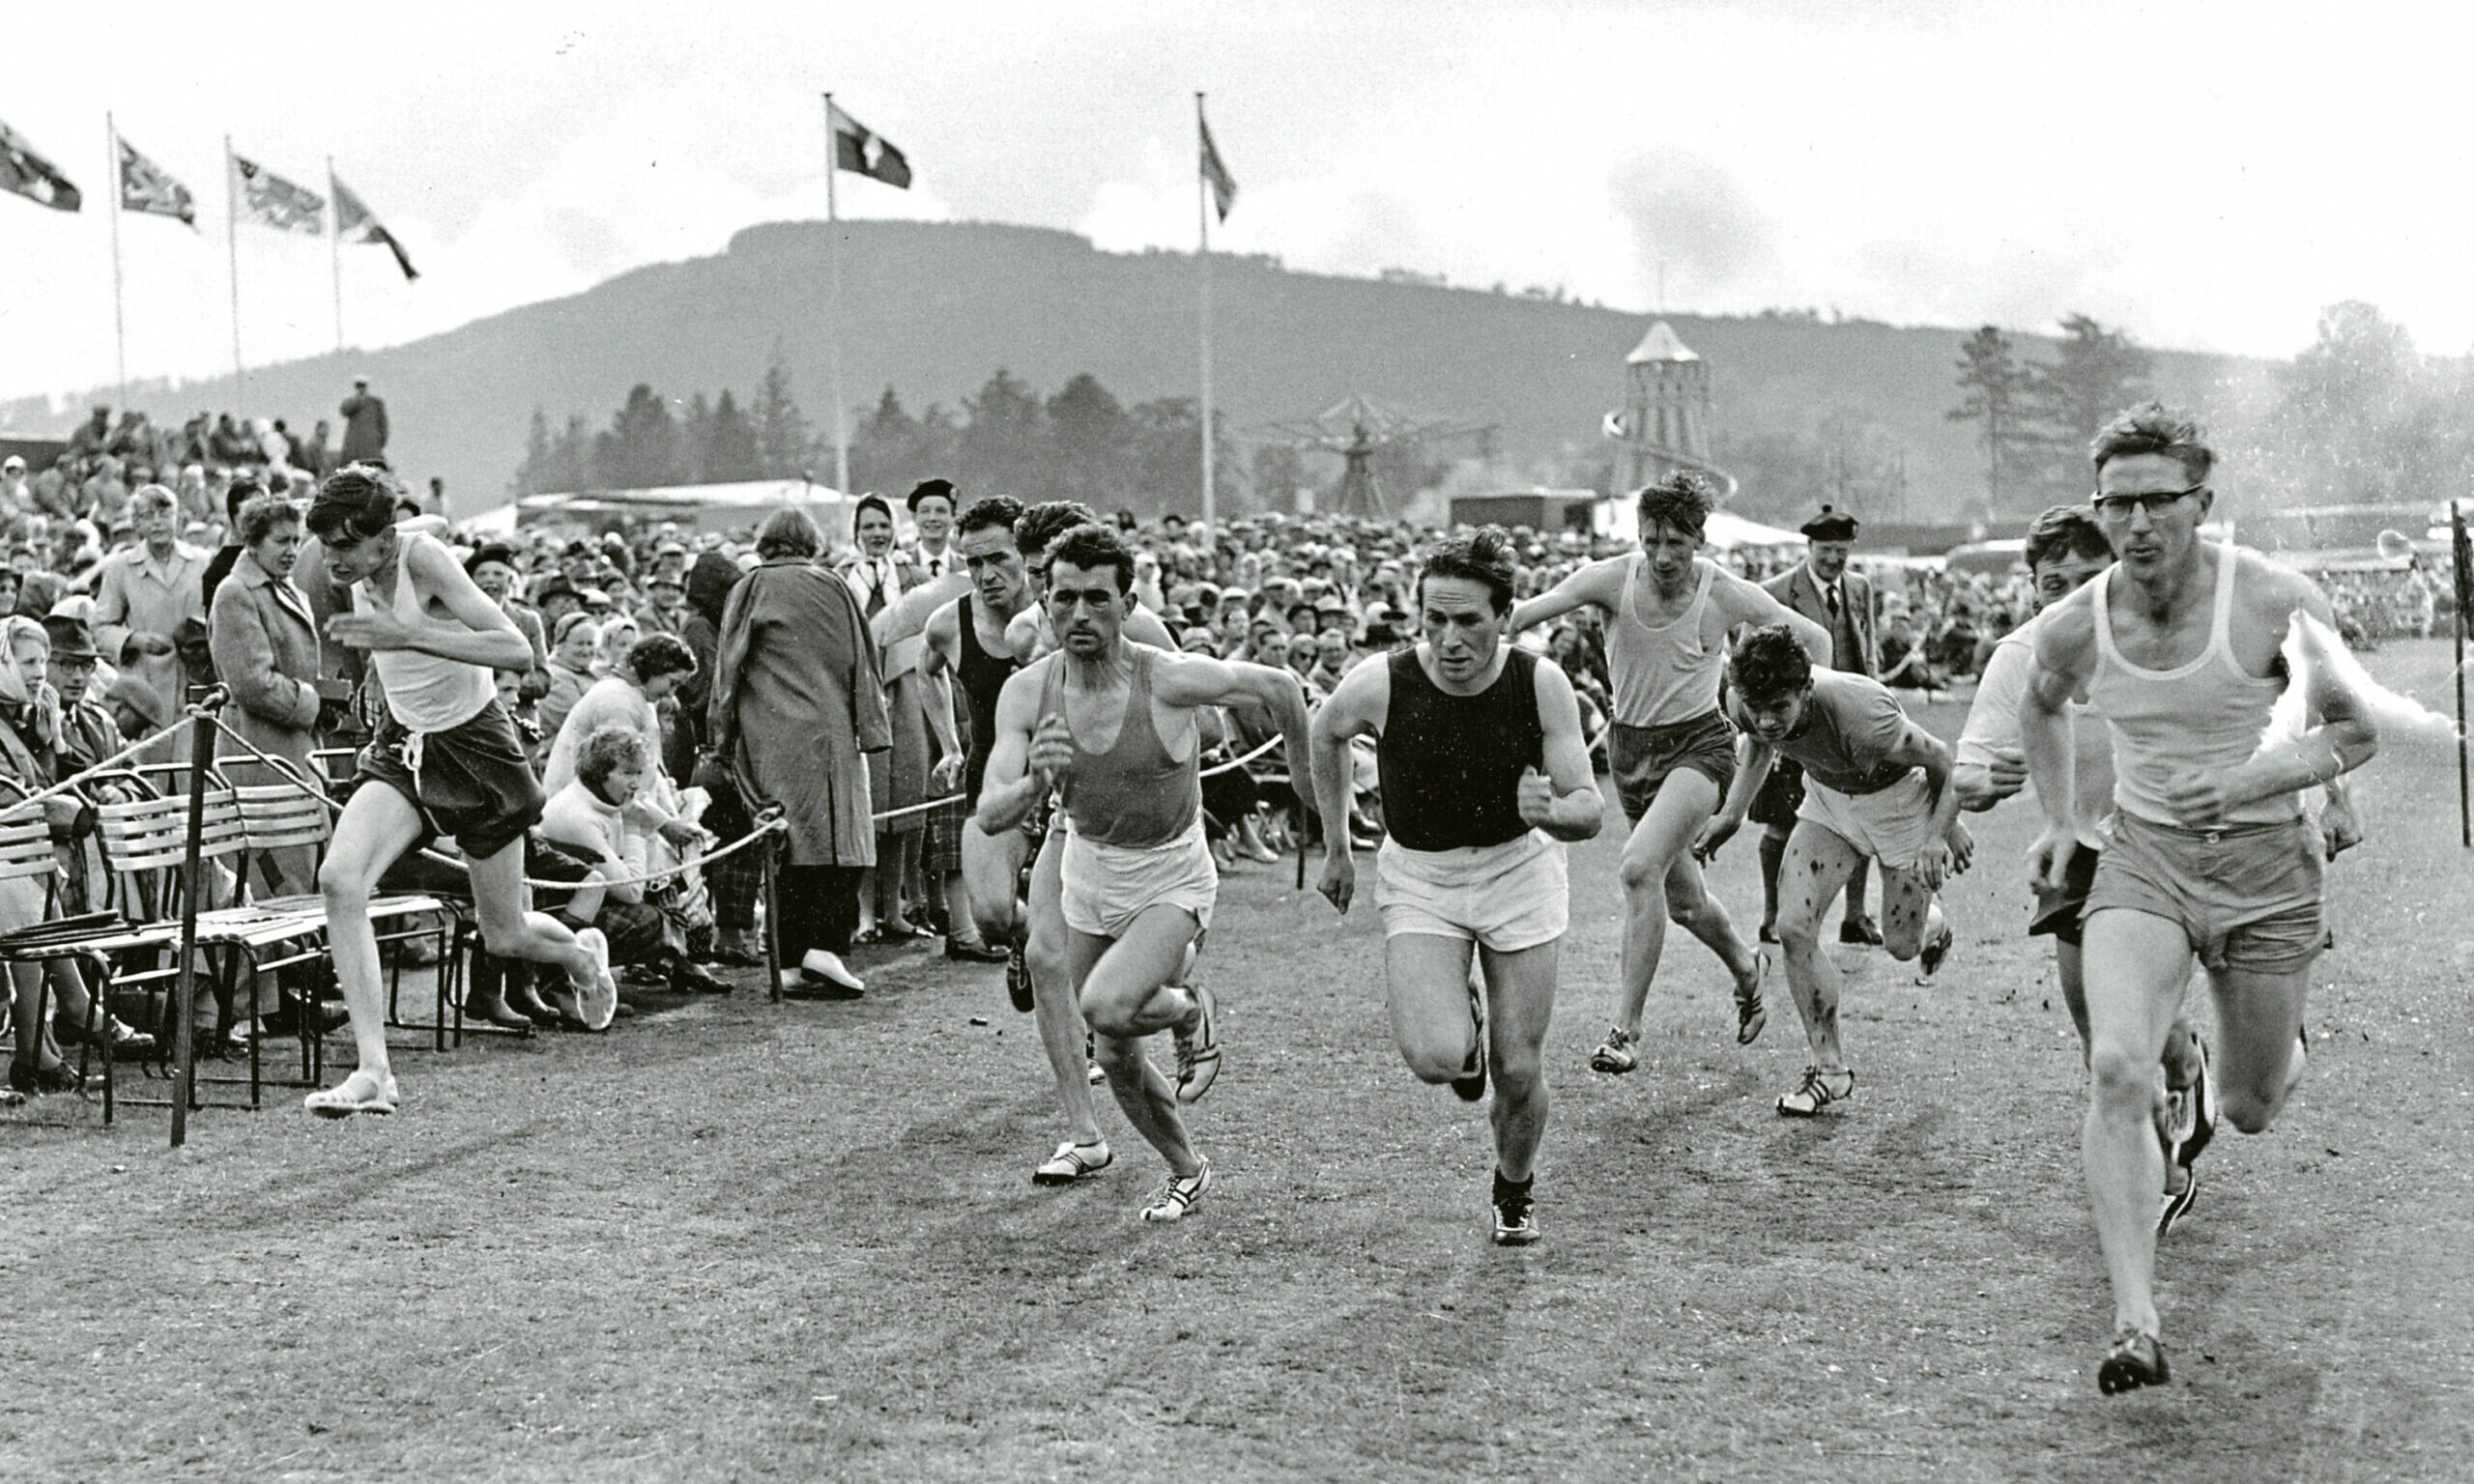 Runners competing in one of the races at the Aboyne Games in 1961.